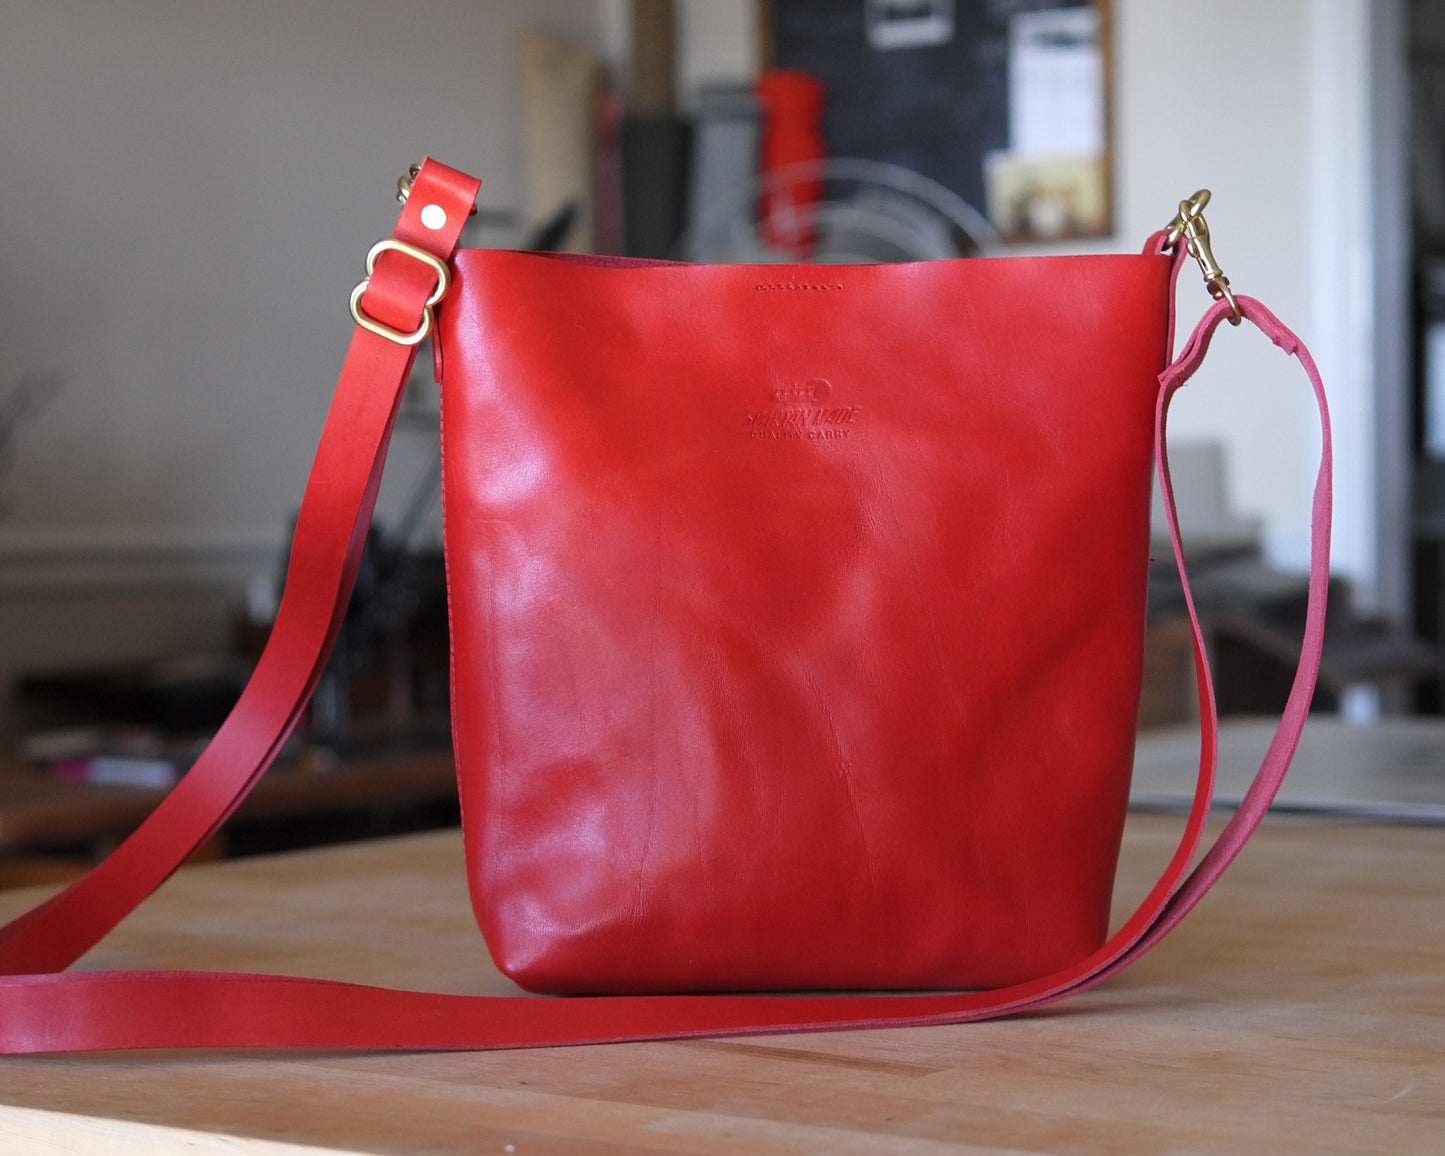 Substation Tote - Red Leather Crossbody